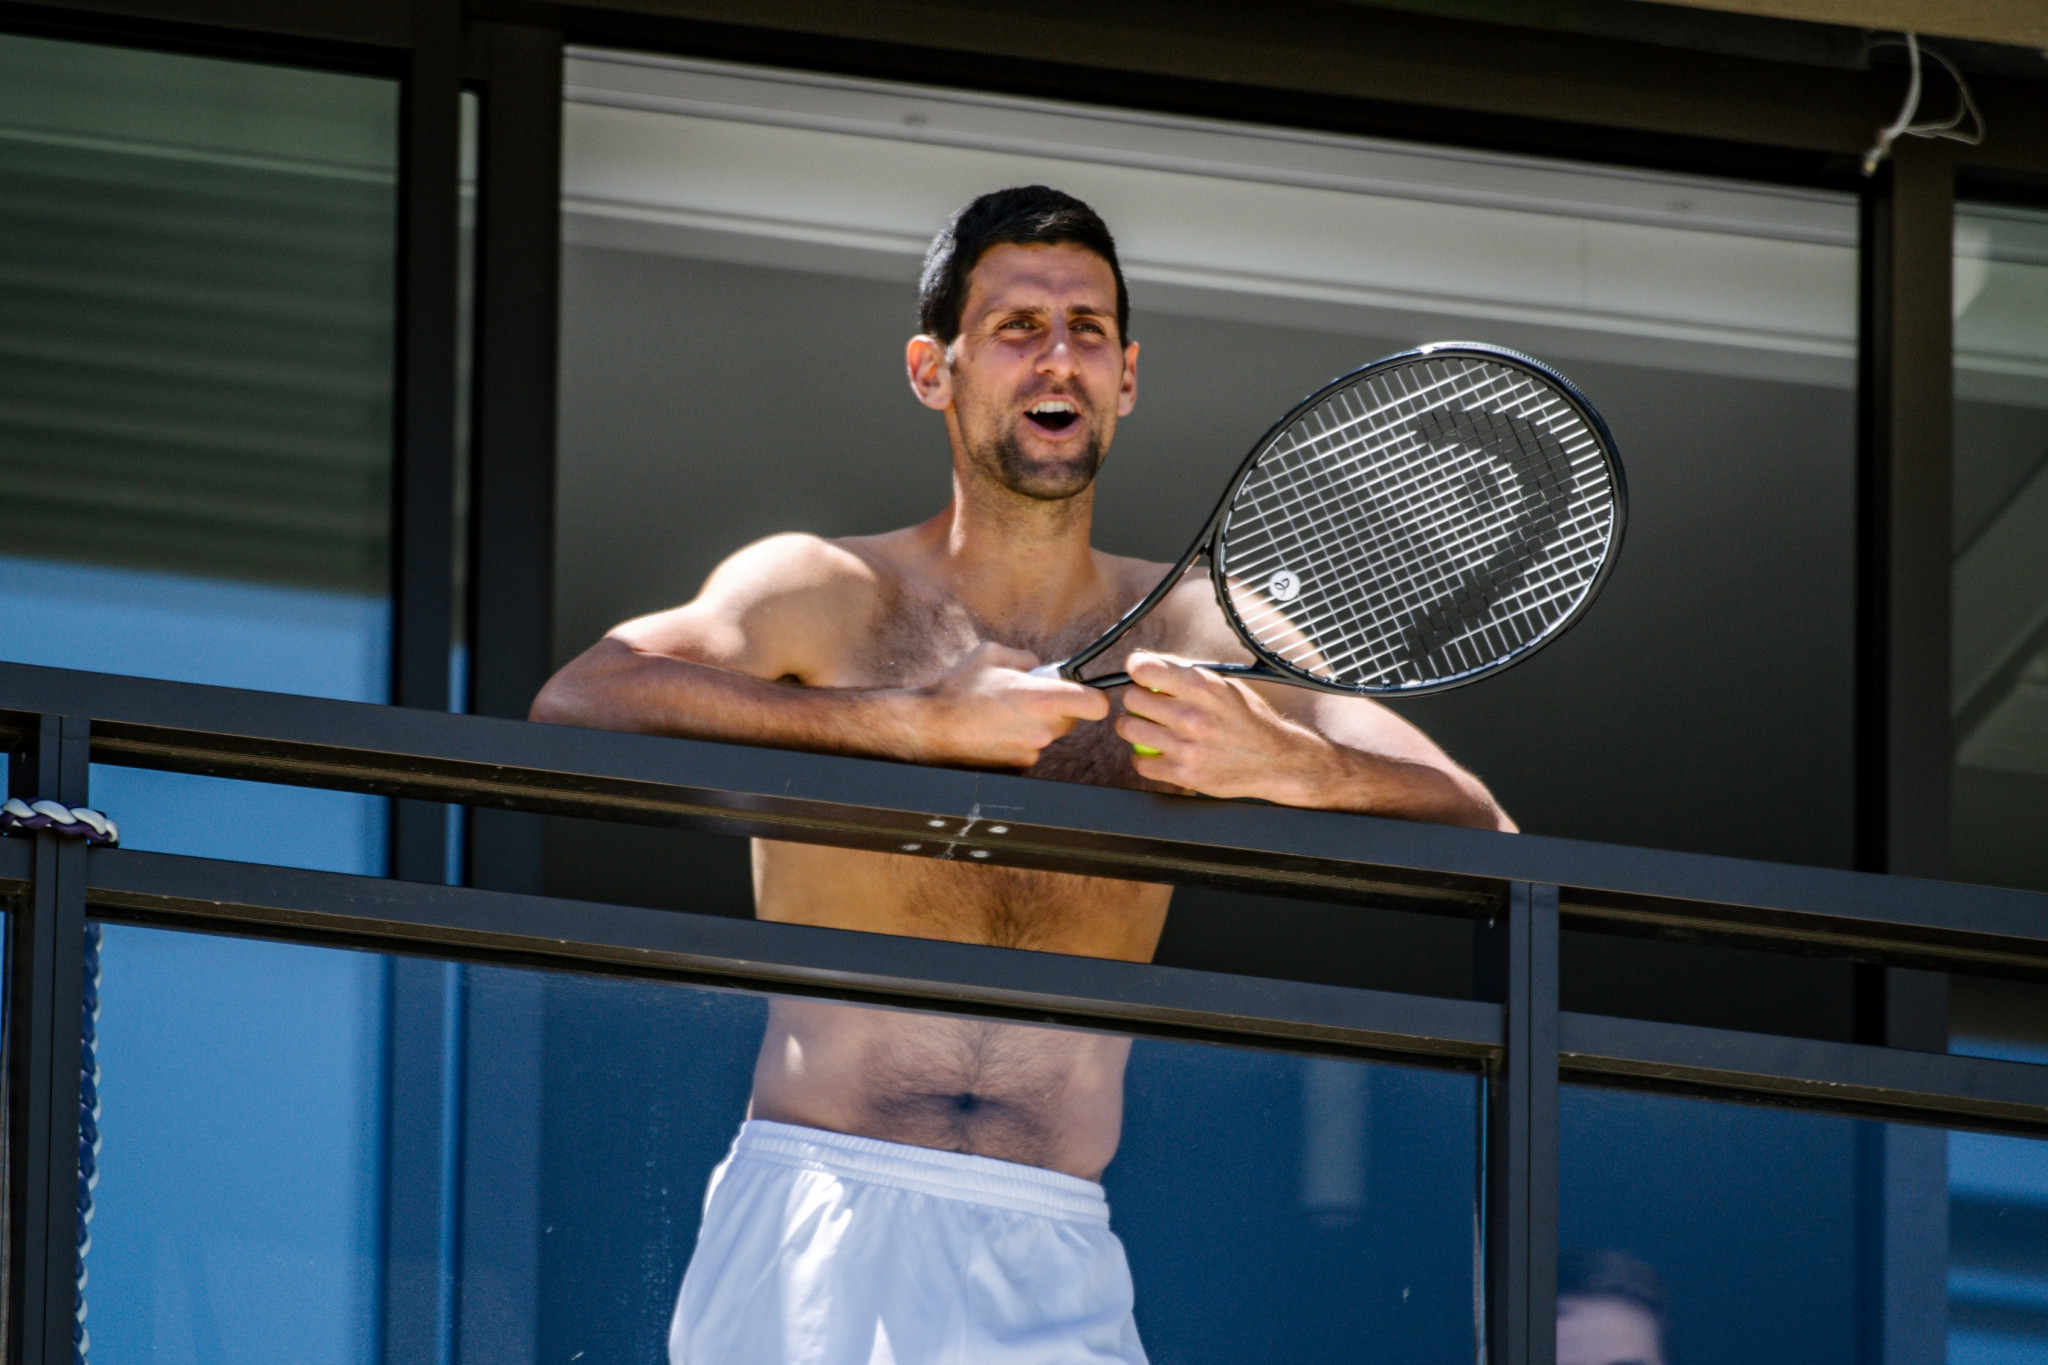 World number one Novak Djokovic has led the complaints from tennis players about quarantine arrangements in the run up to next month's Australian Open in Melbourne ©Getty Images